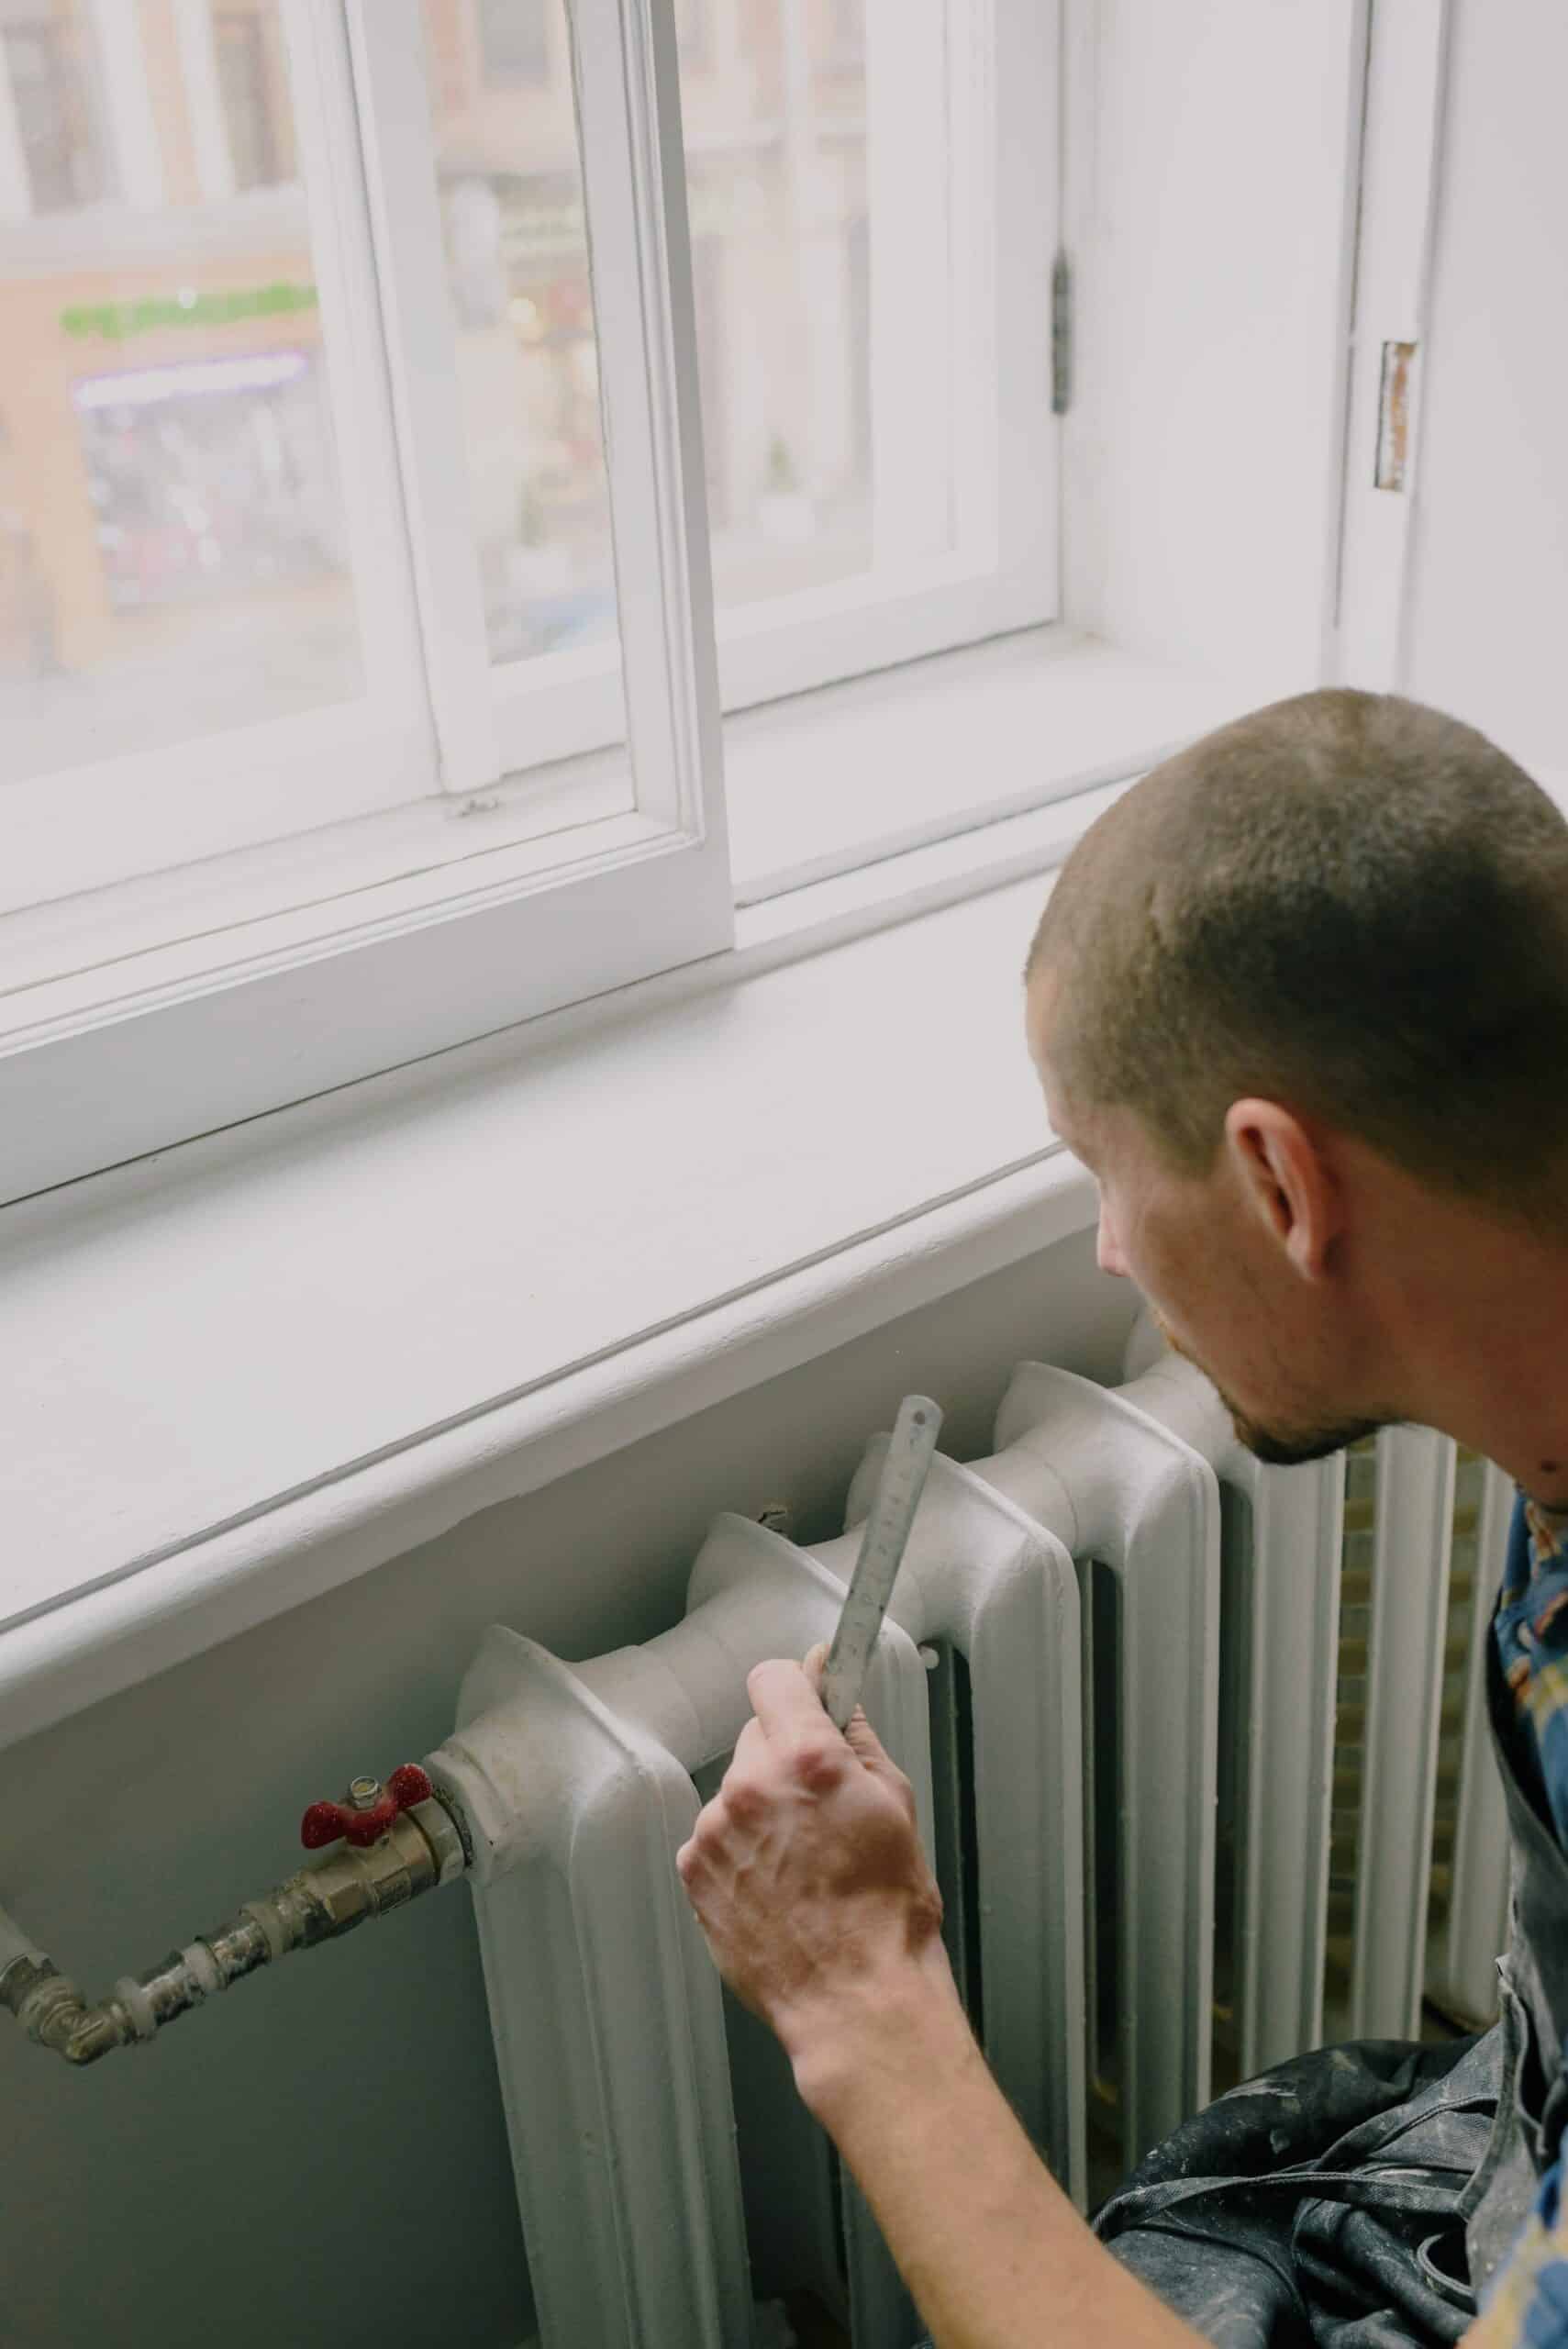 How Long Can a Landlord Keep You Without Heating in the UK